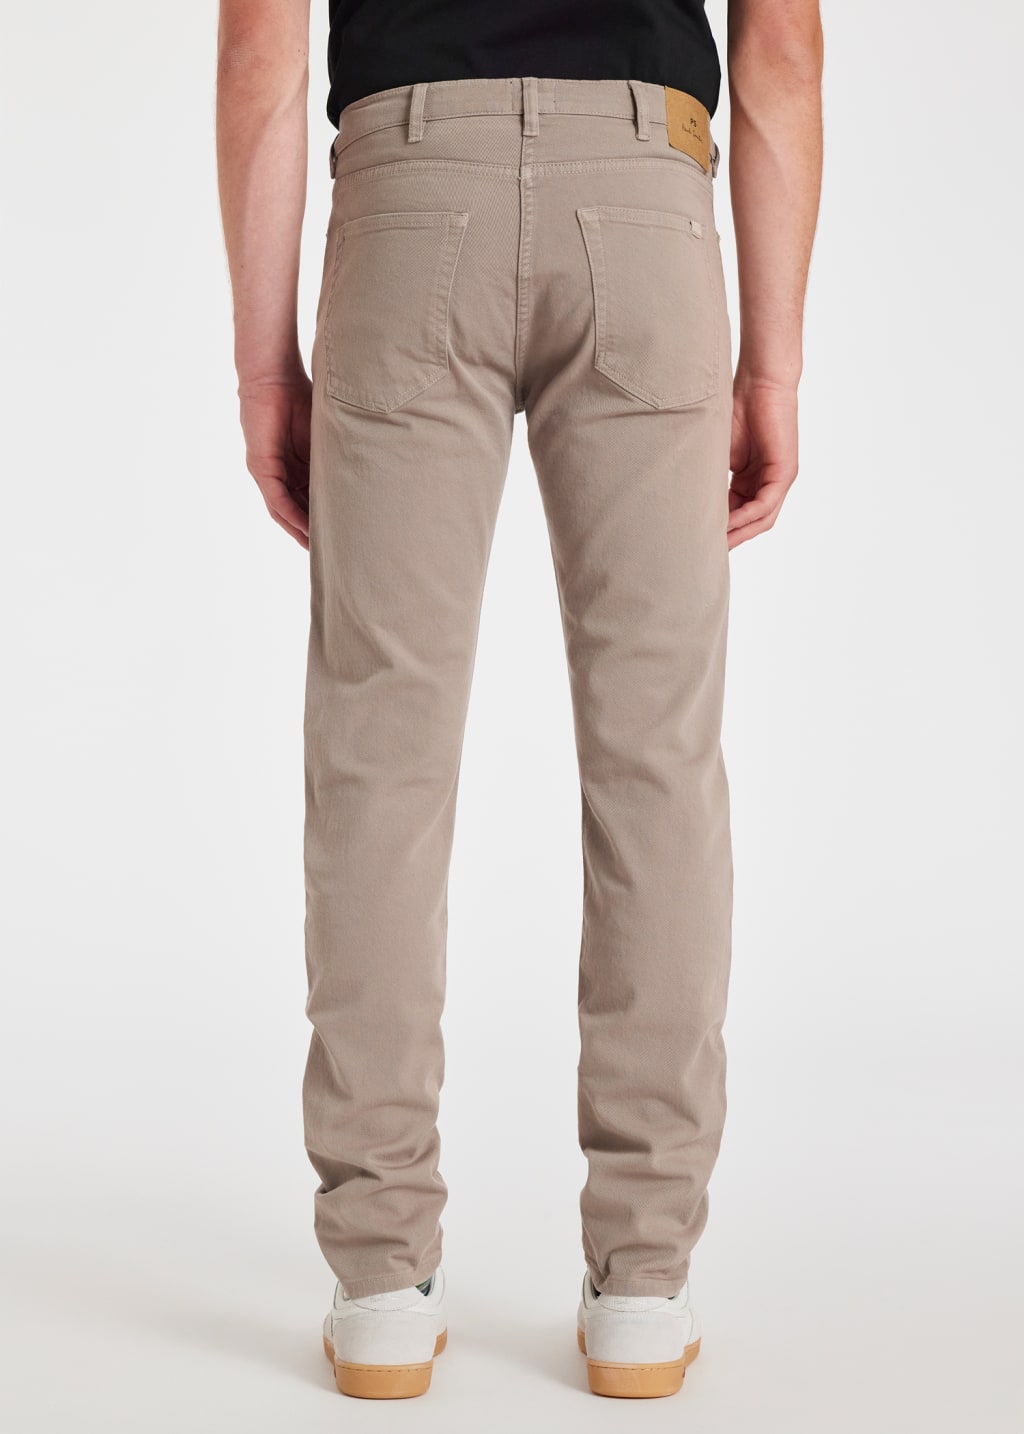 Model View - Tapered-Fit Taupe Garment-Dyed Jeans Paul Smith